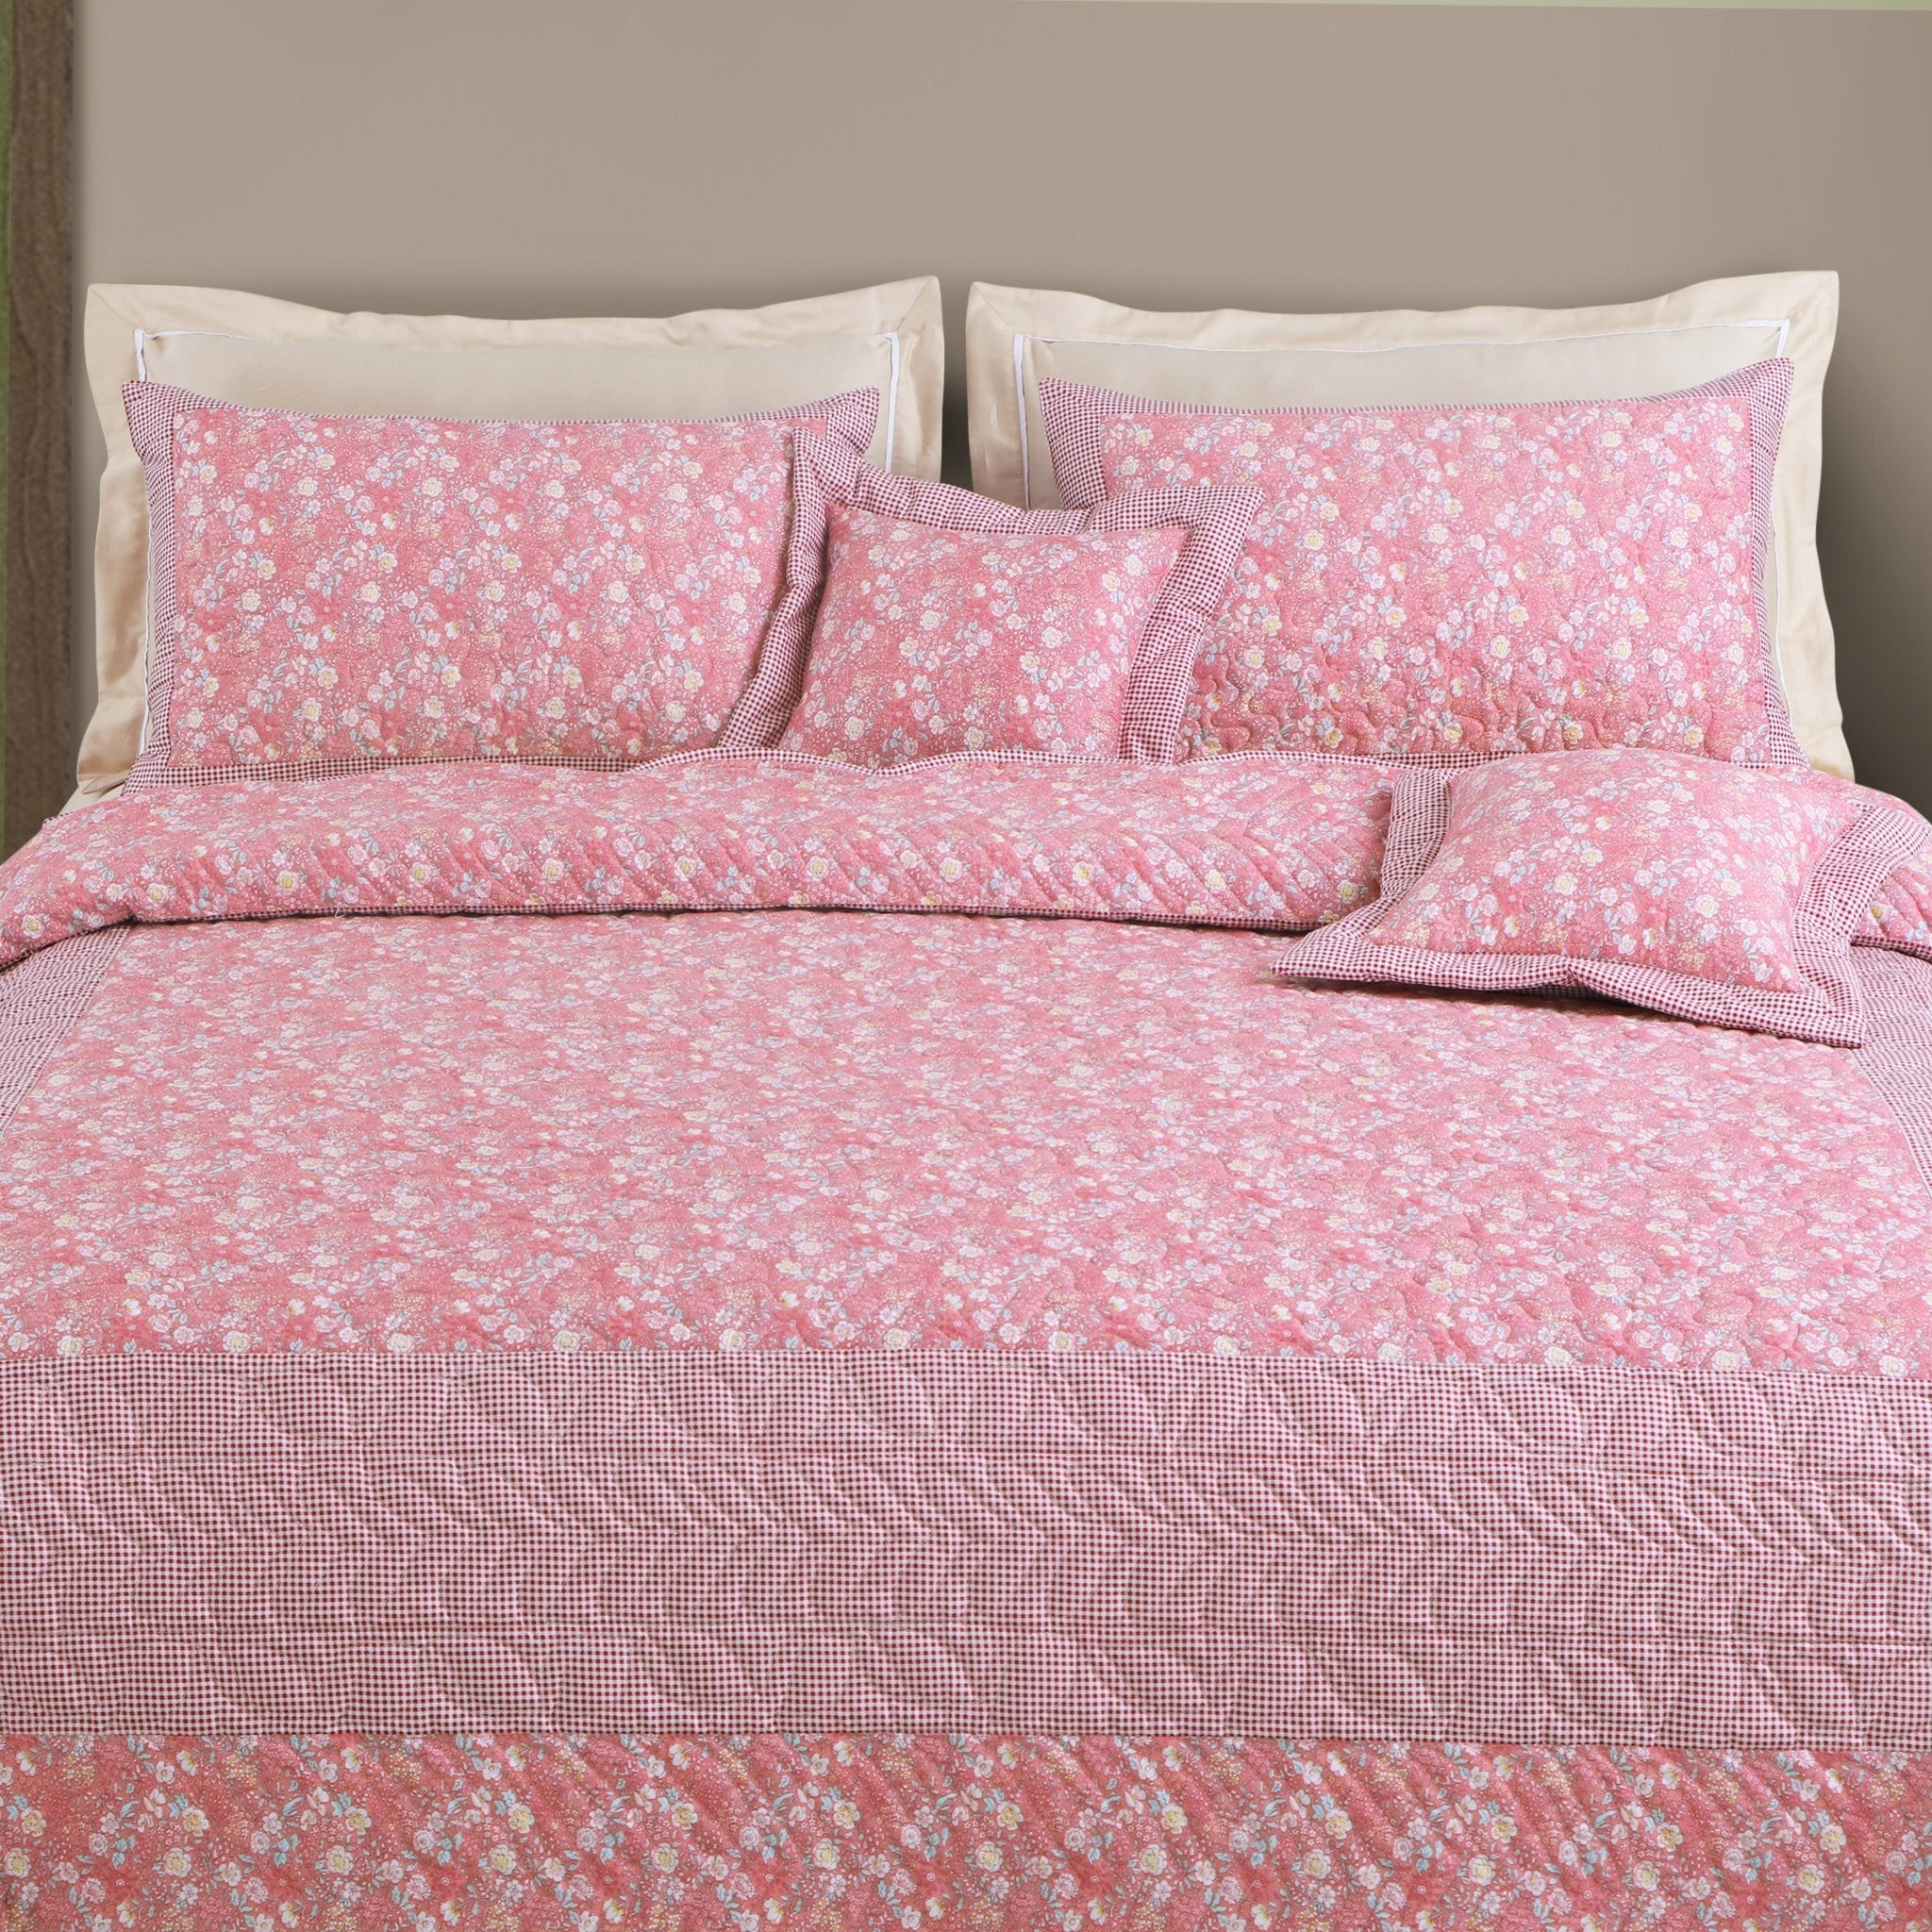 Malako Royale 100% Cotton Red Floral King Size 5 Piece Quilted Bedspread Set - MALAKO